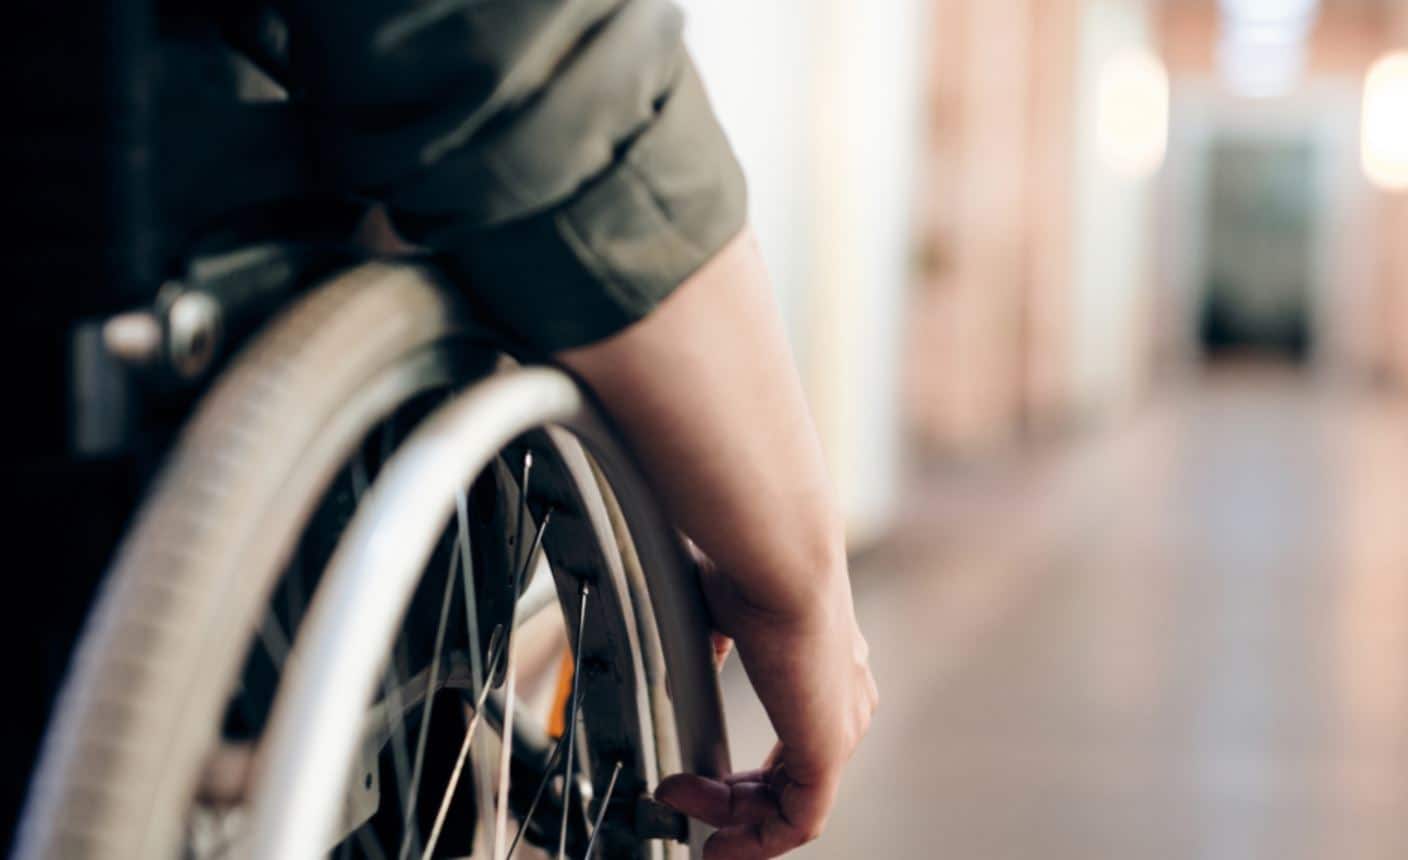 A close-up of a person's hand on a wheelchair wheel.